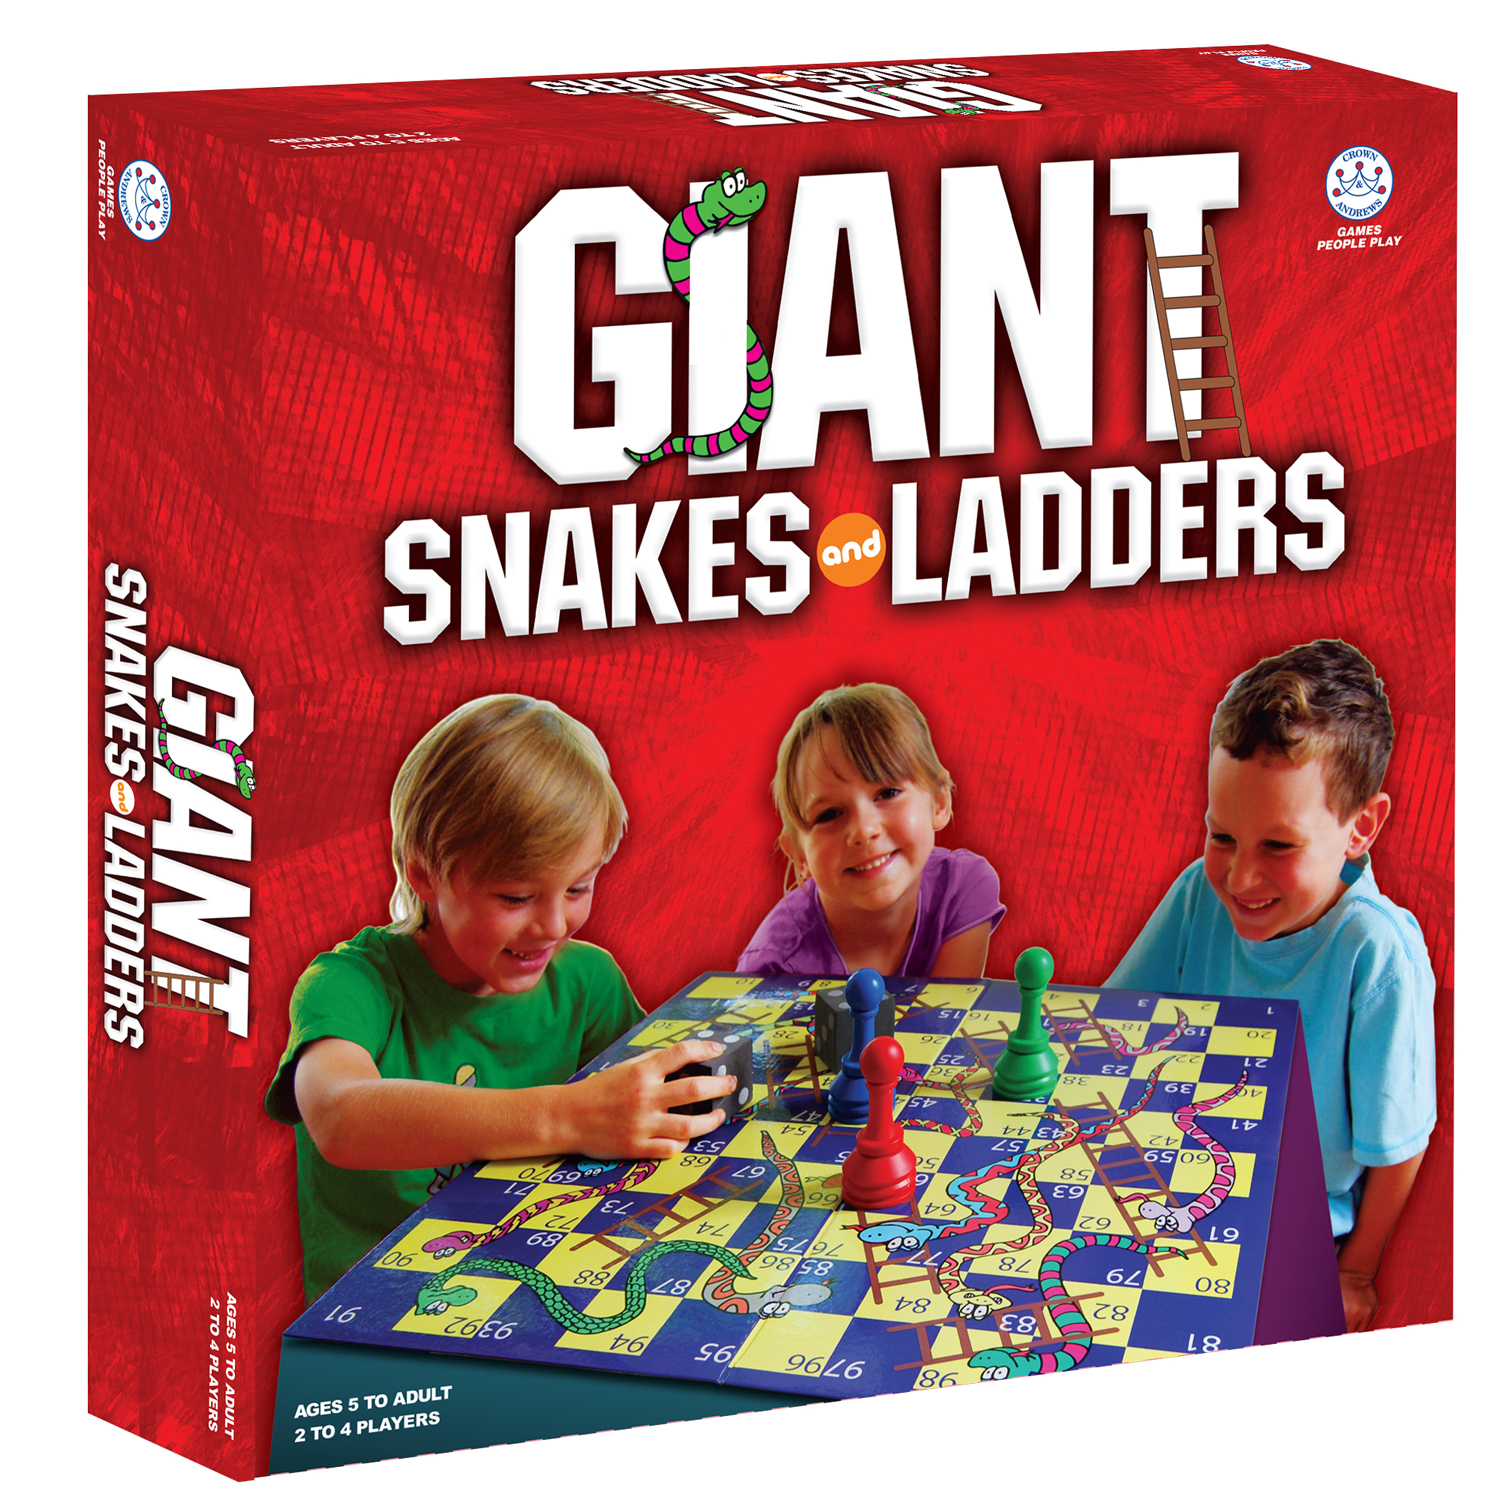 Pressman Toys - Giant Snakes and Ladders Game - image 2 of 4